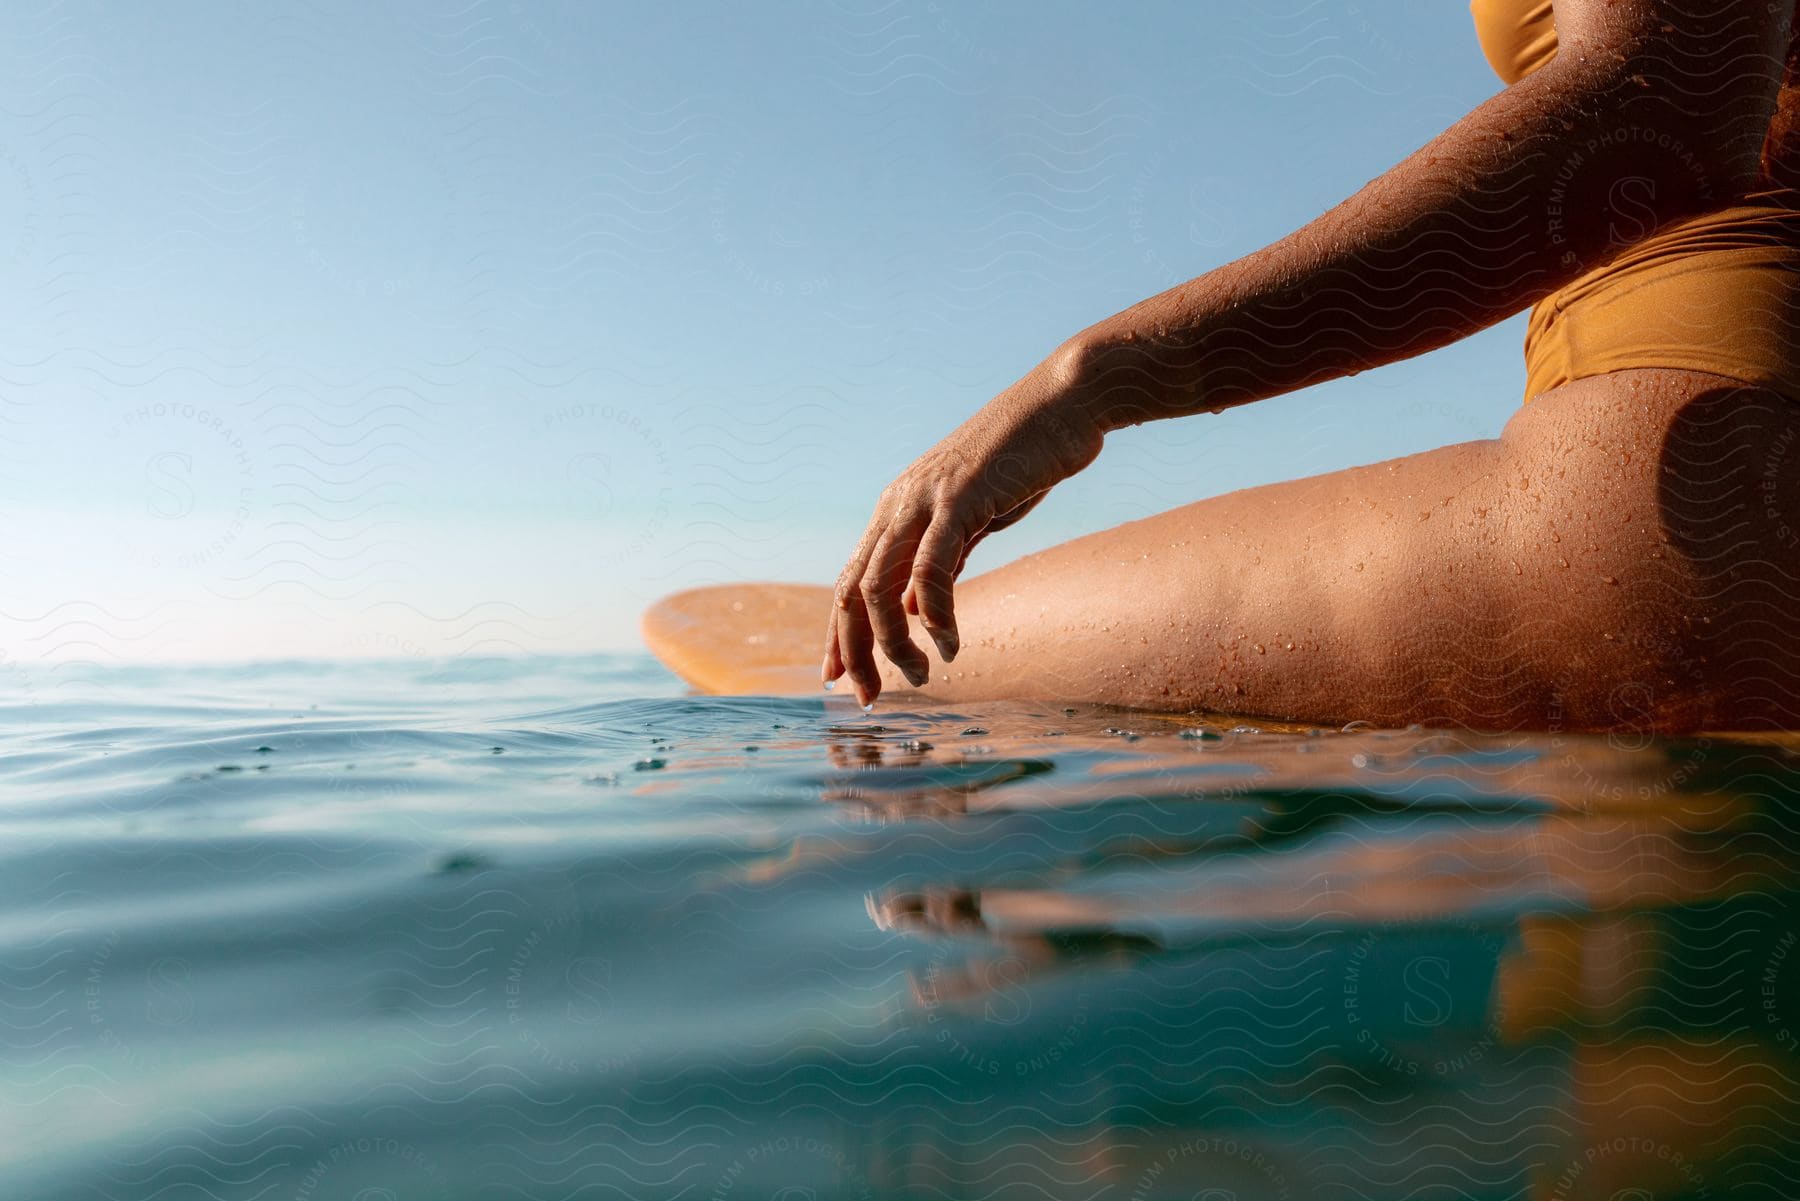 A sun-kissed woman in a vibrant orange bikini gracefully rides the gentle swells of the ocean on her surfboard, her silhouette mirroring the serene horizon.